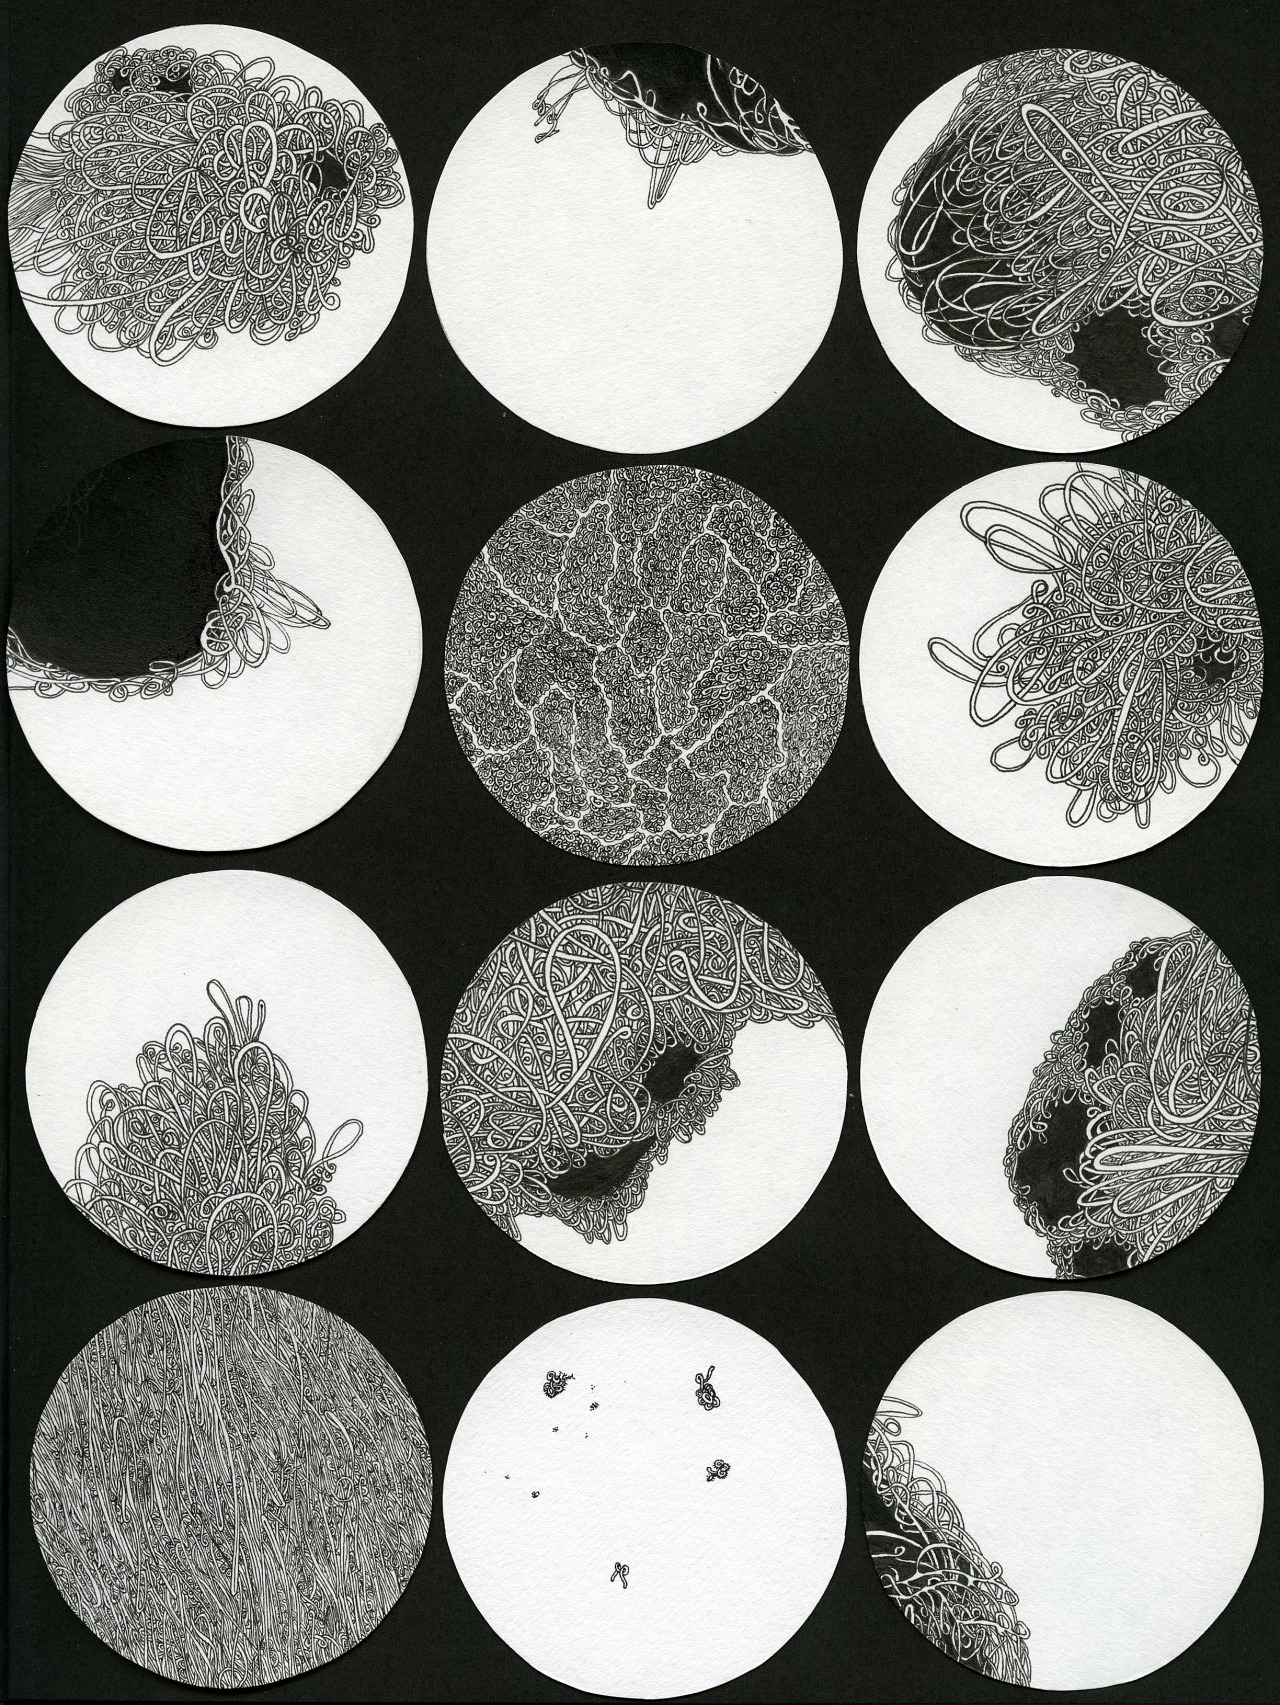 Microscopic view chinese ink on papel 12 X 6.5cm &#8220;Ø&#8221; Lucy Valente Pereira